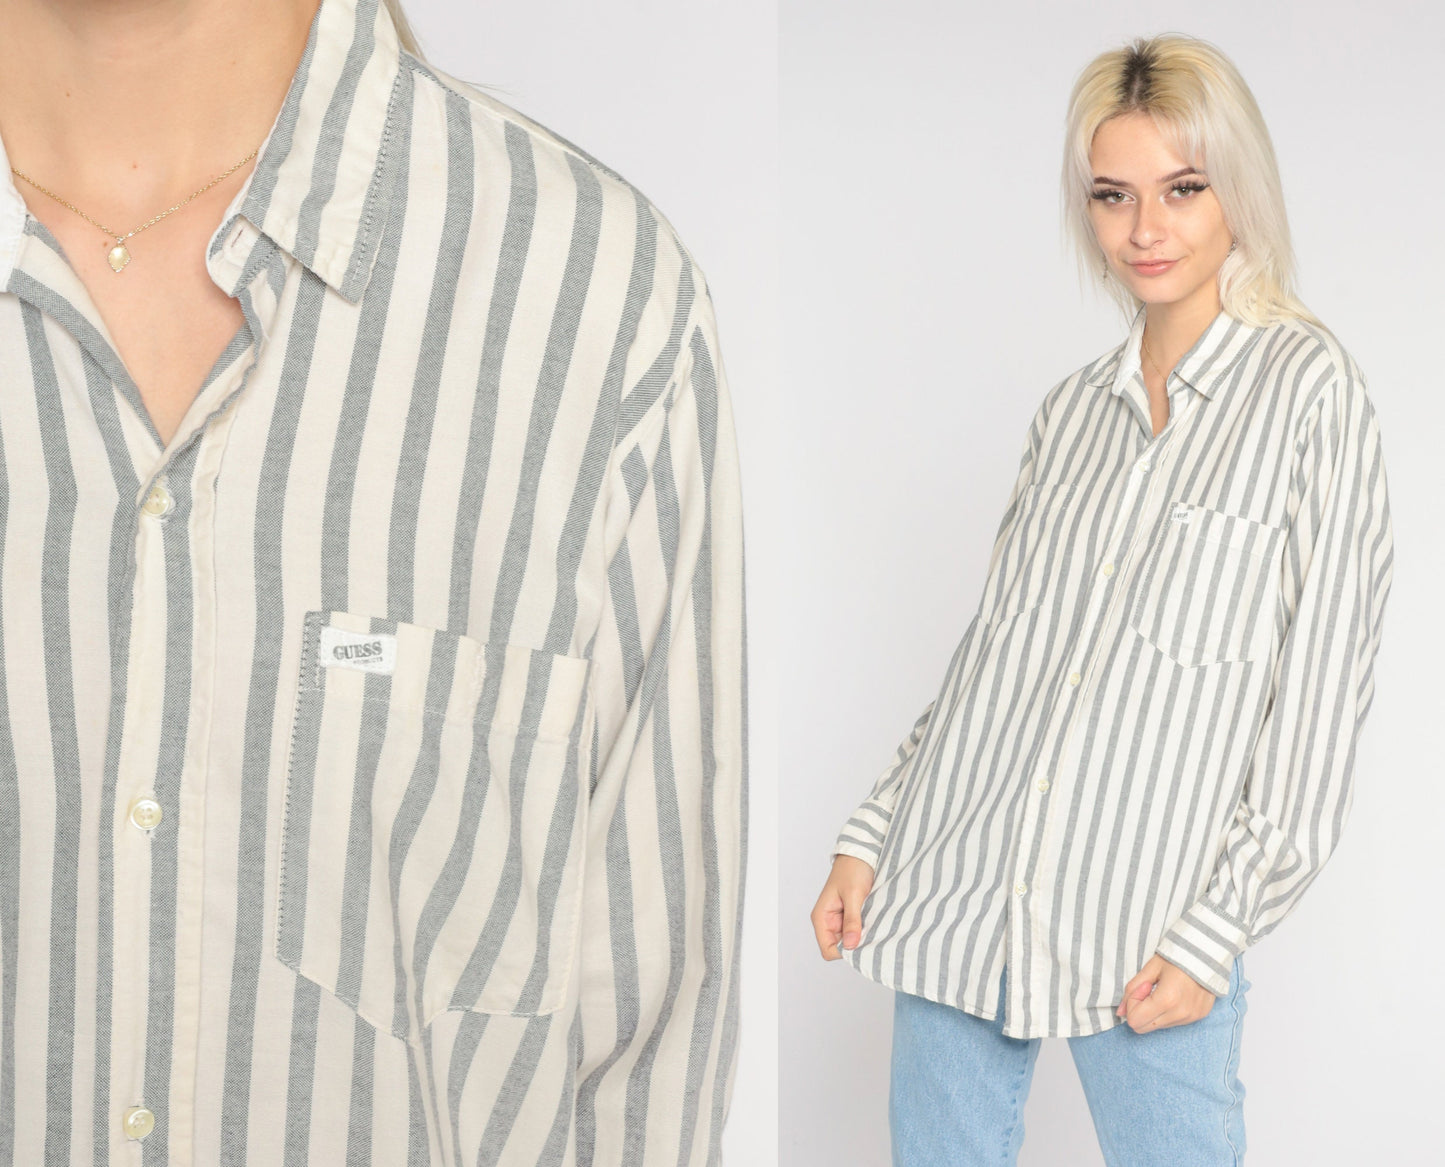 90s GUESS Shirt Grey Striped Shirt White Button Up Blouse Long Sleeve Top Grunge 1990s Vintage Medium Large